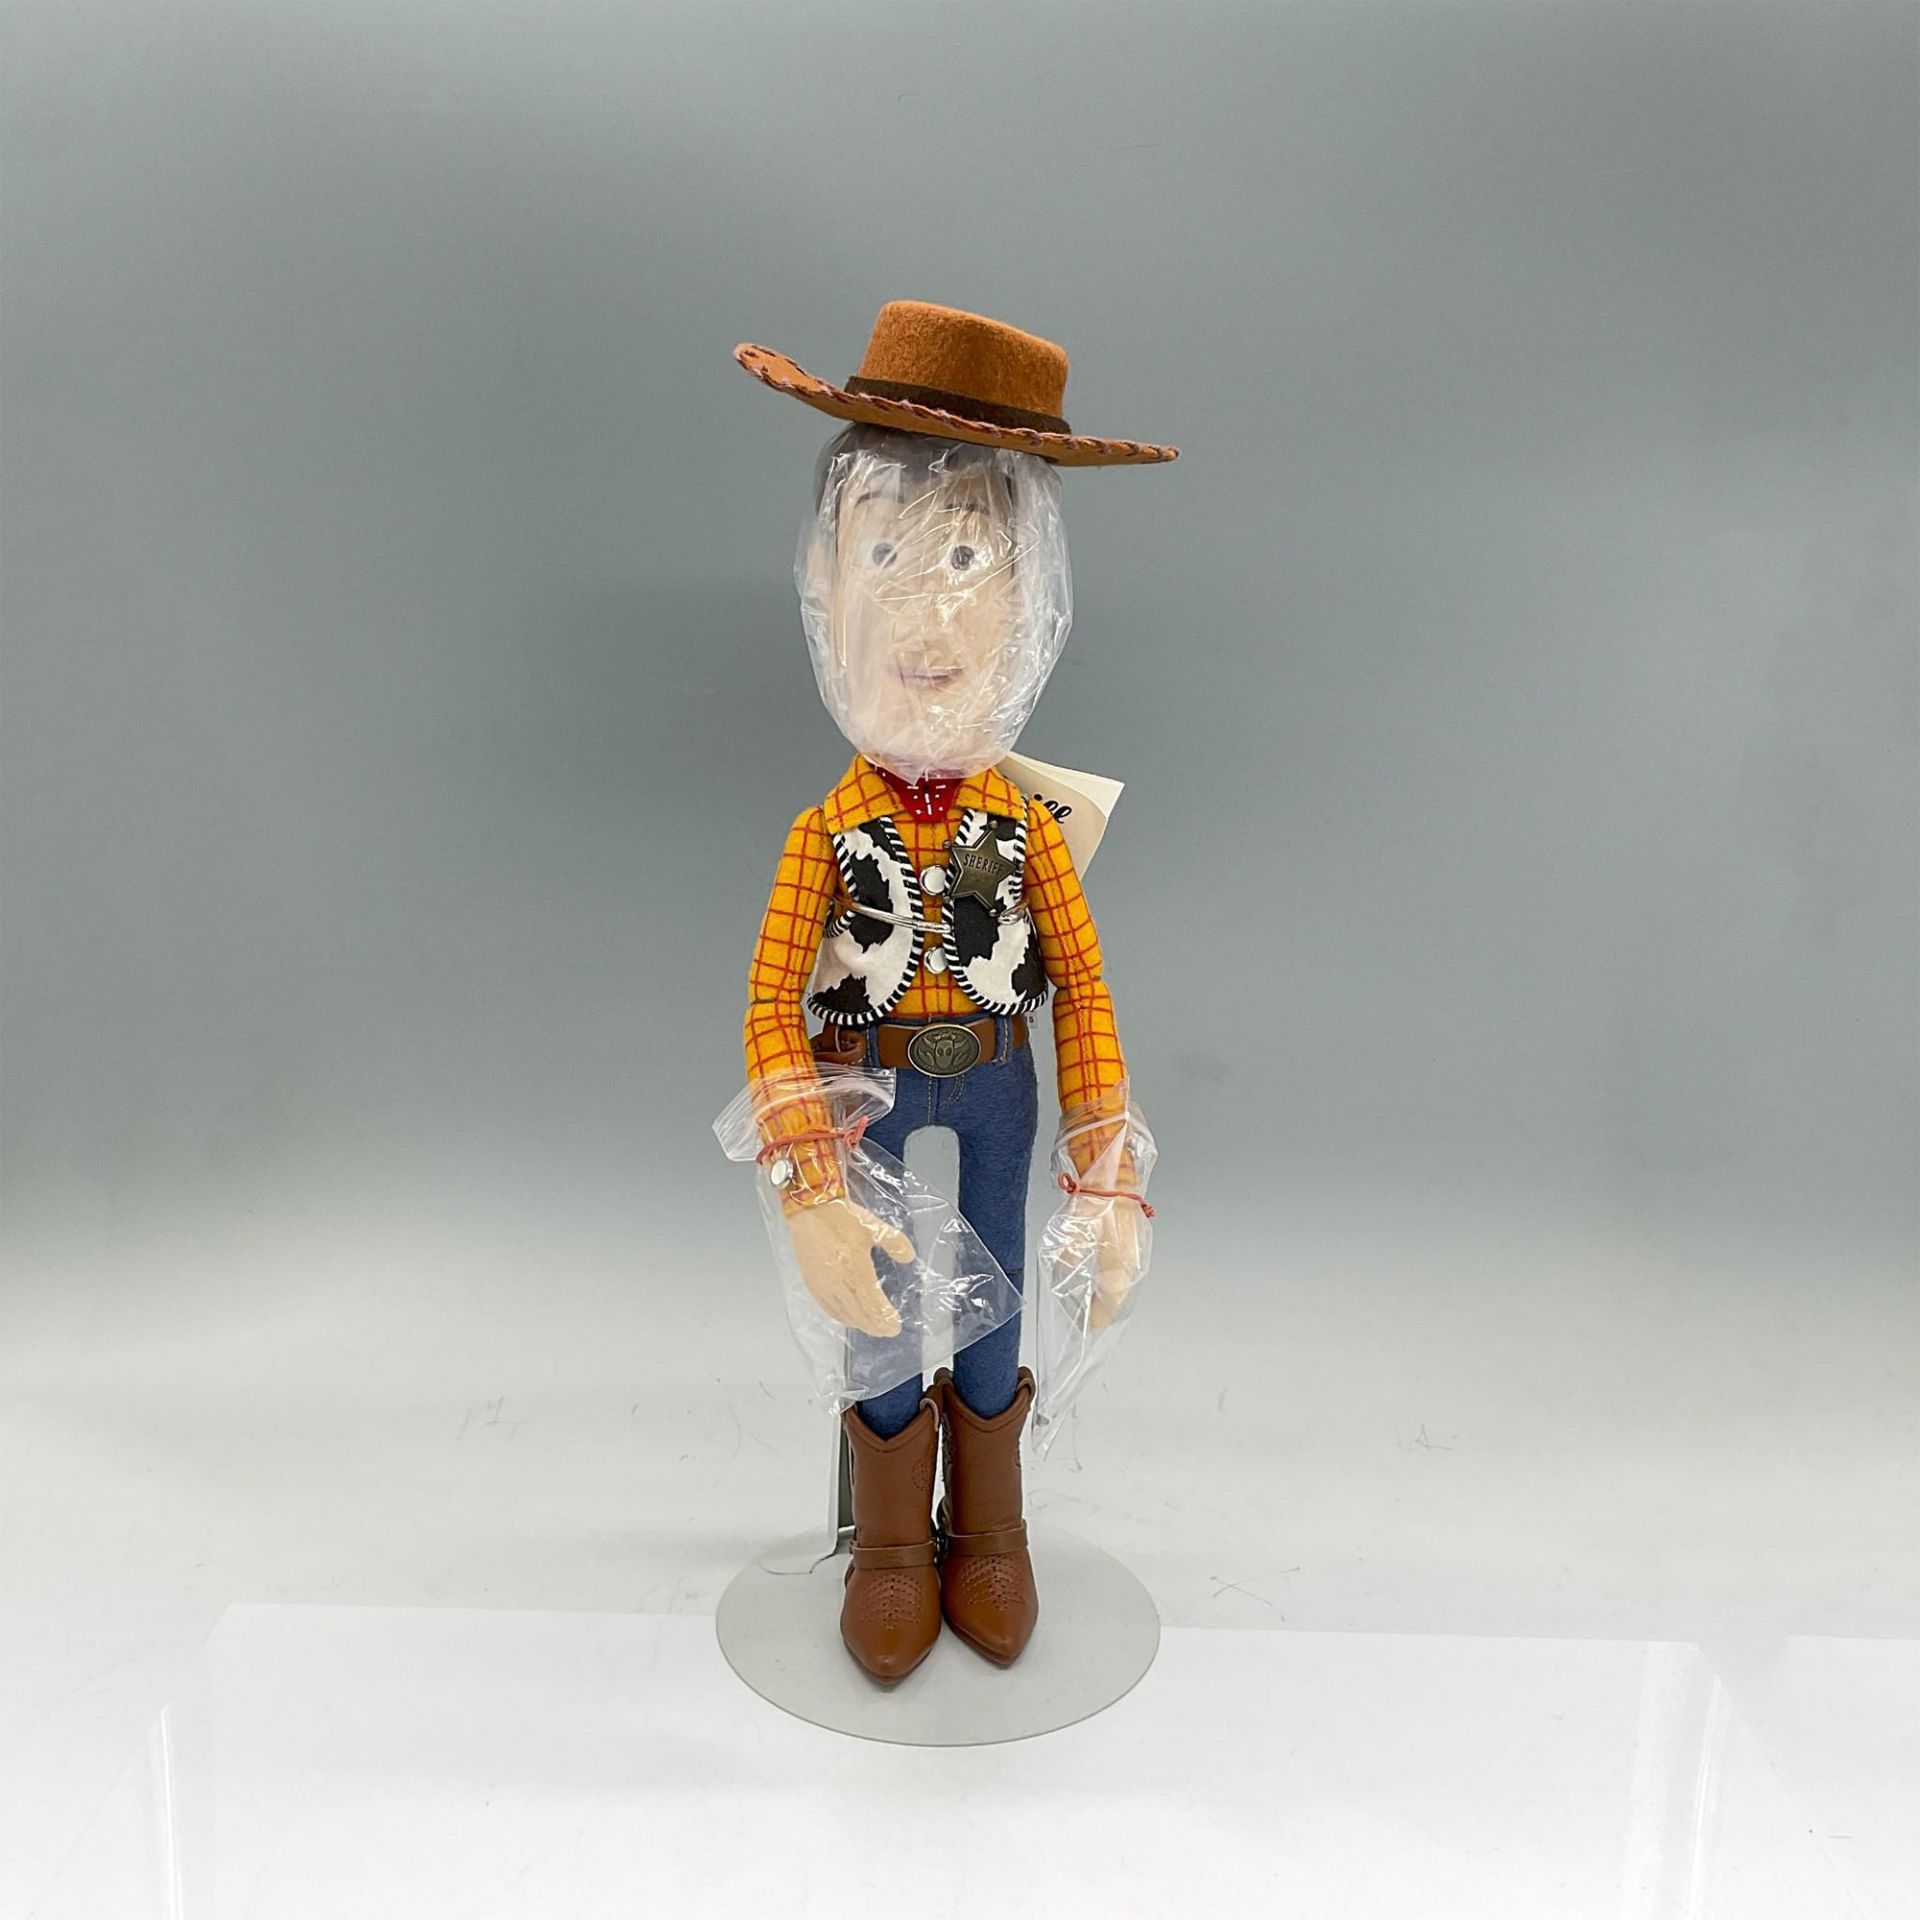 Steiff Character, Woody from Disney/Pixar's Toy Story - Image 10 of 12